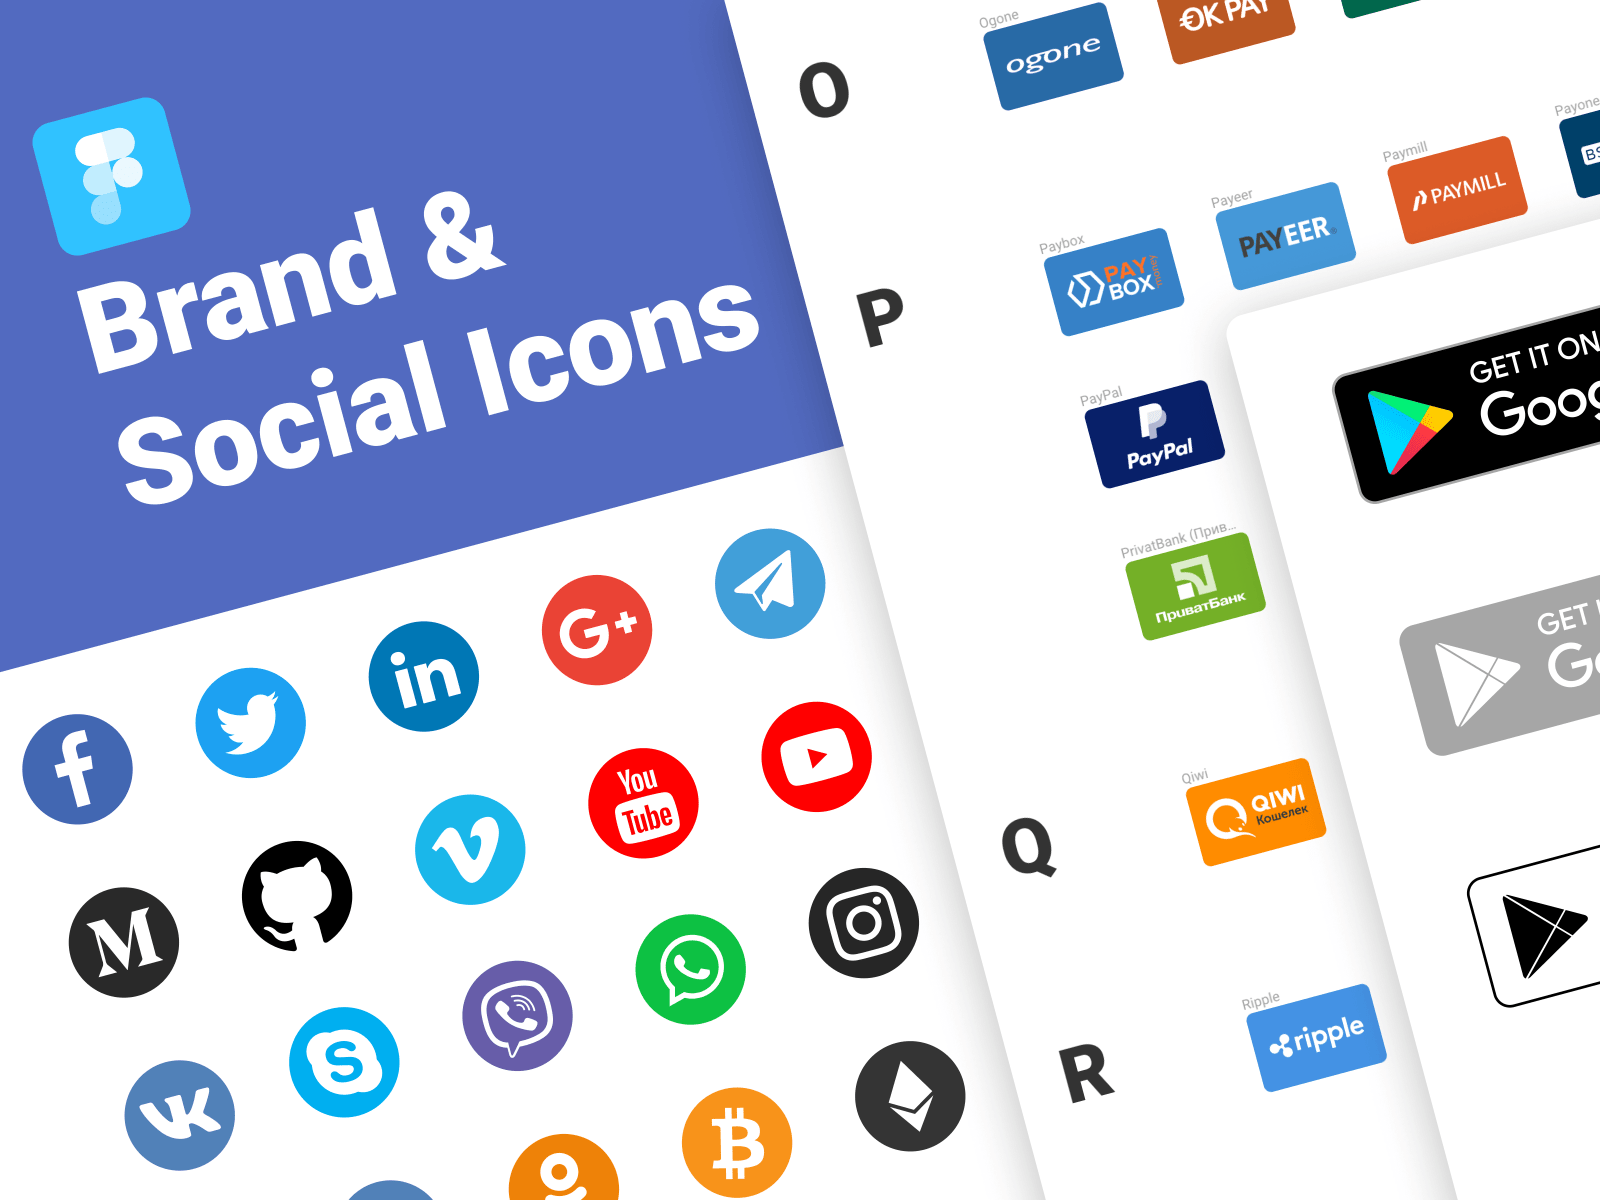 Brand & Social Icons for Figma Free